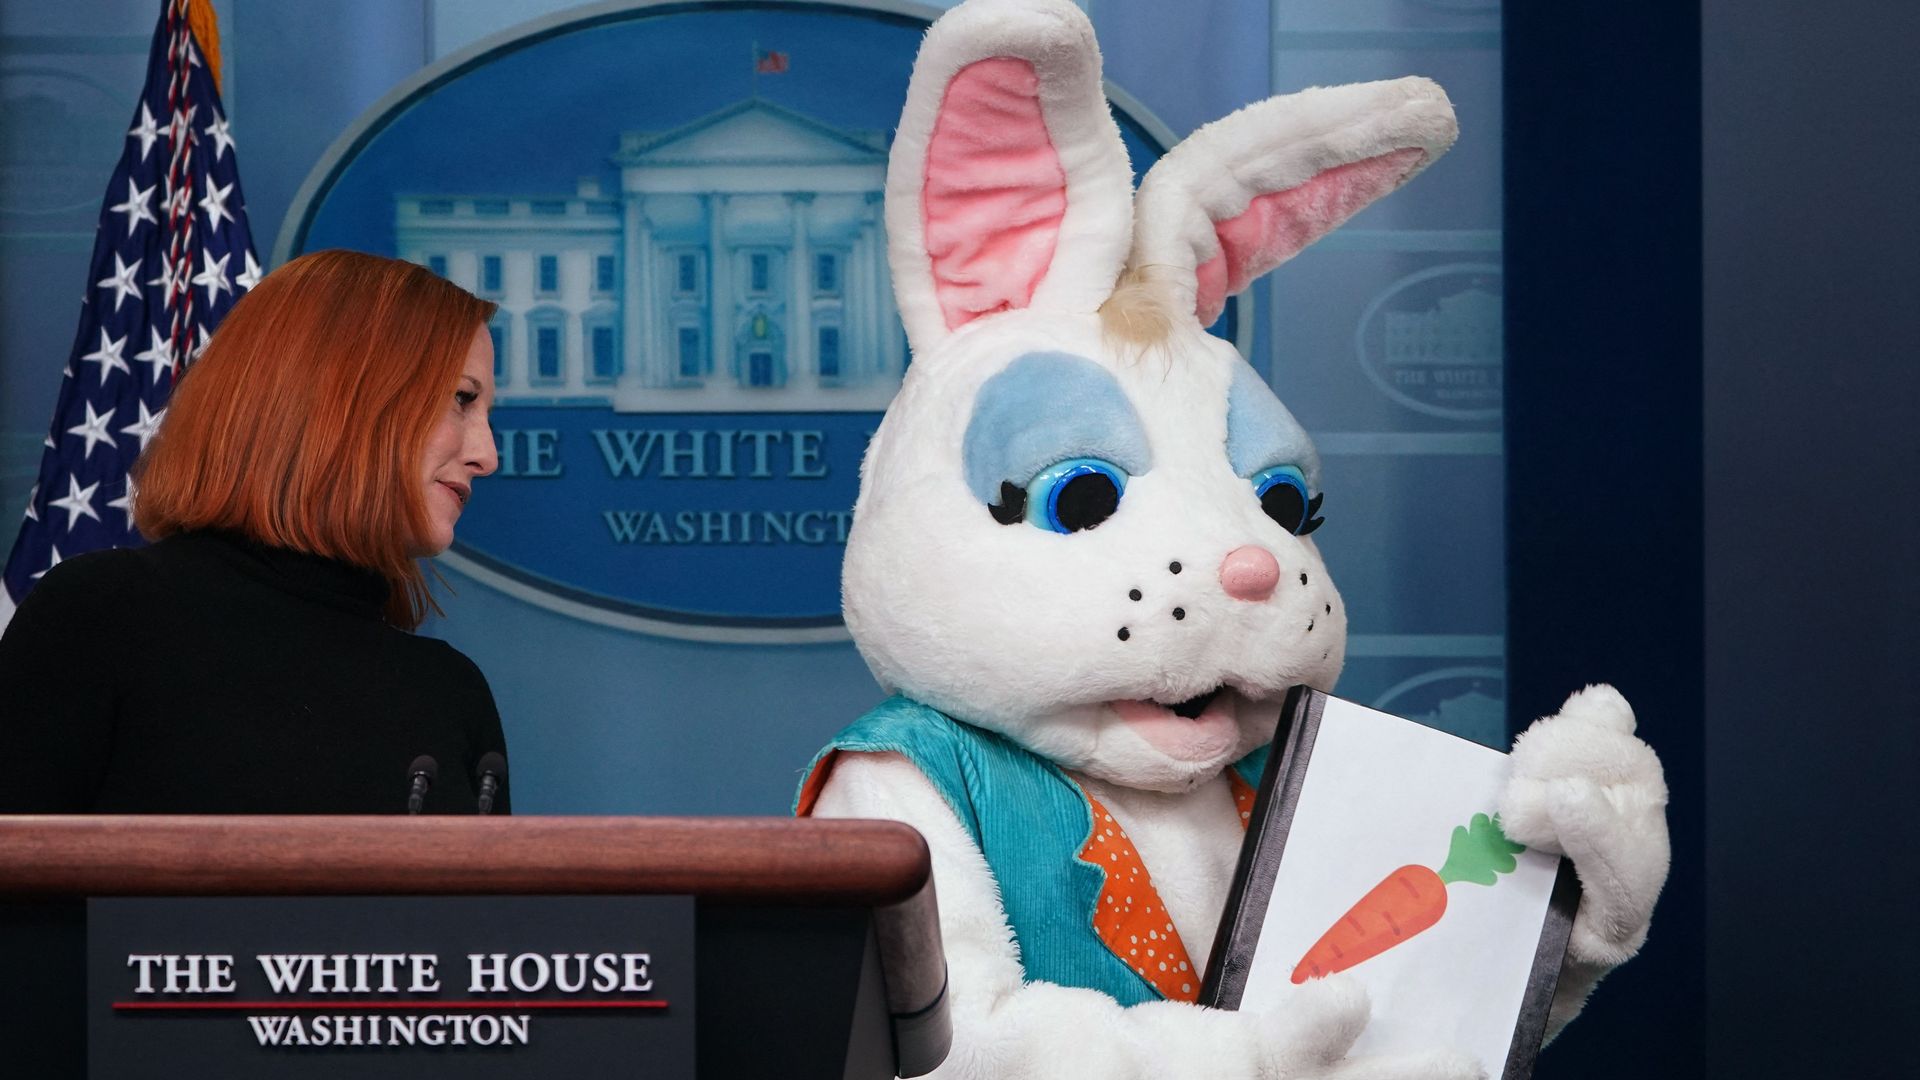 White House press secretary and a costumed Easter Bunny share the podium in the White House briefing room